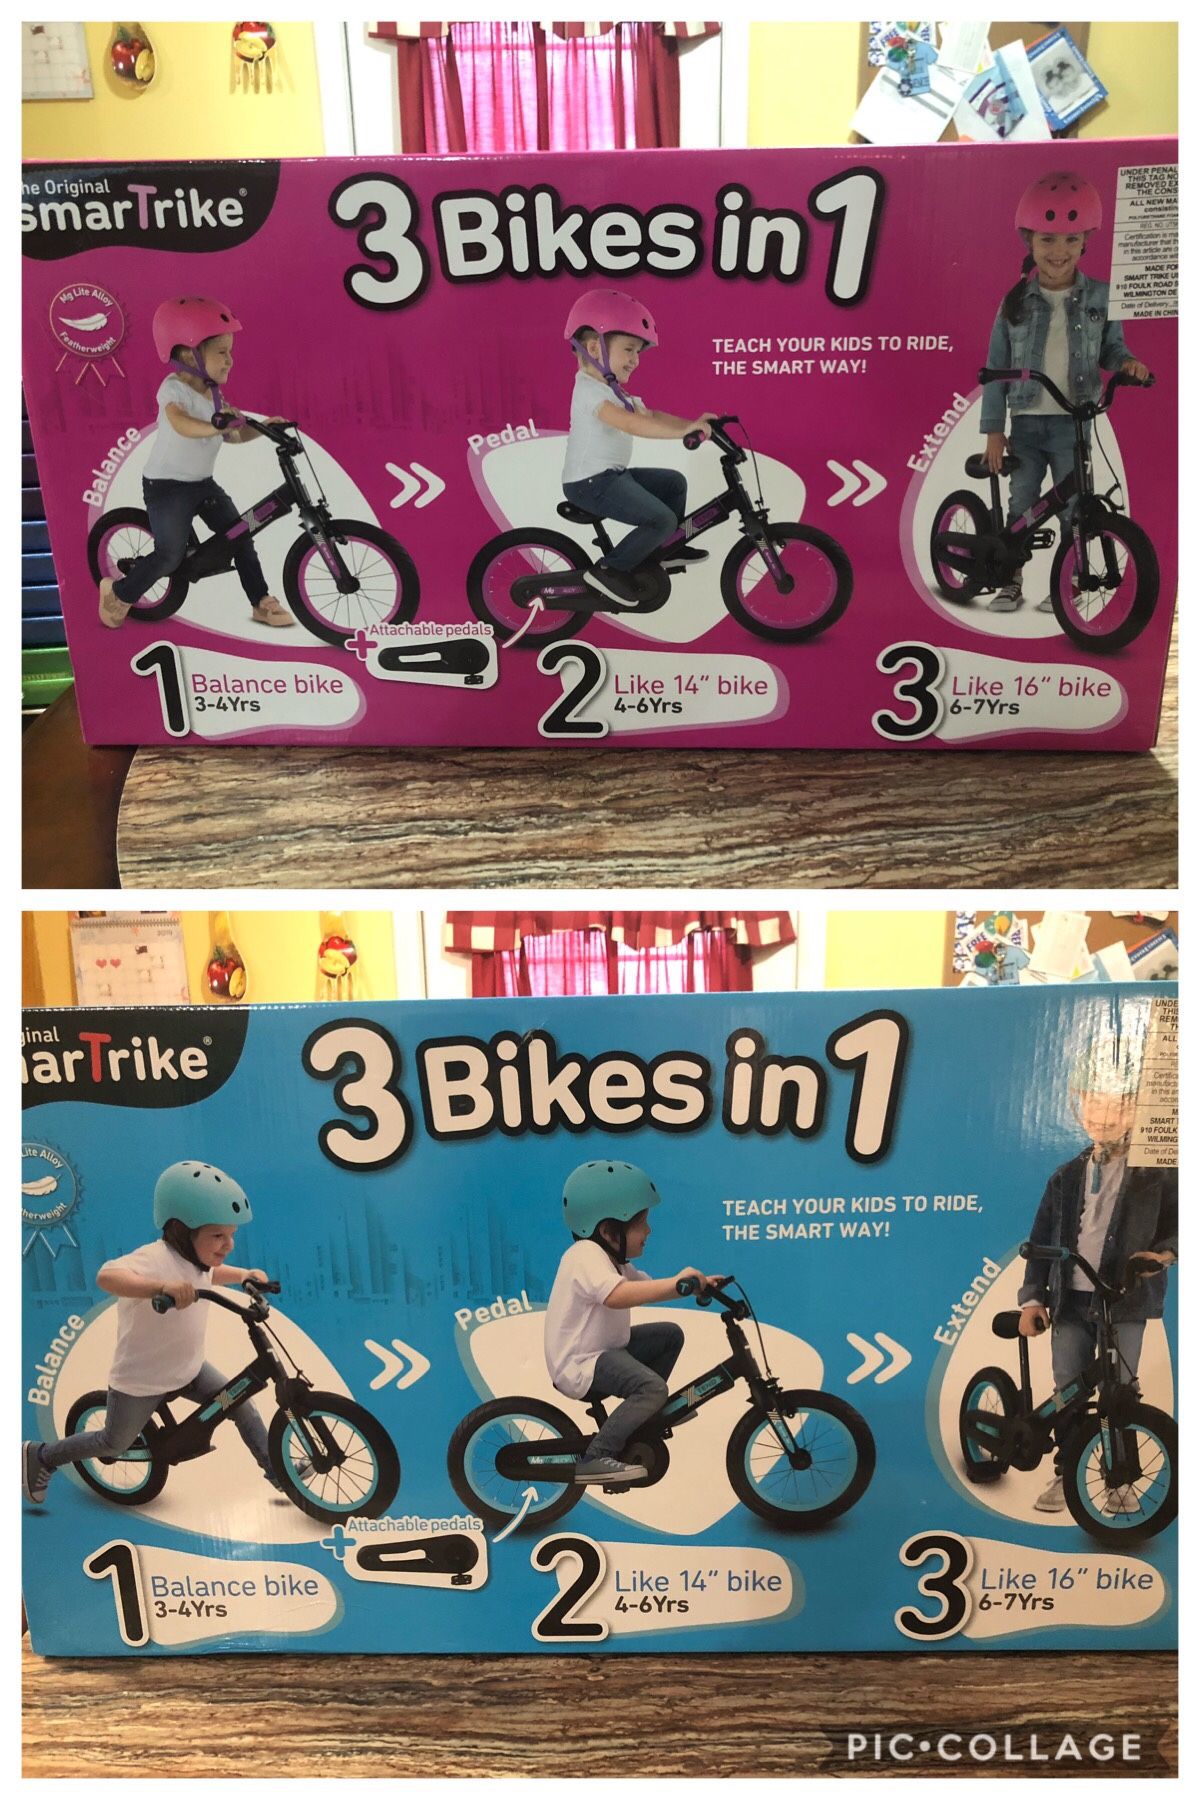 New SmarTrike 3 in 1 Convertible Balance to Pedal Bike for kids 3-7 yrs (have Blue or Pink)